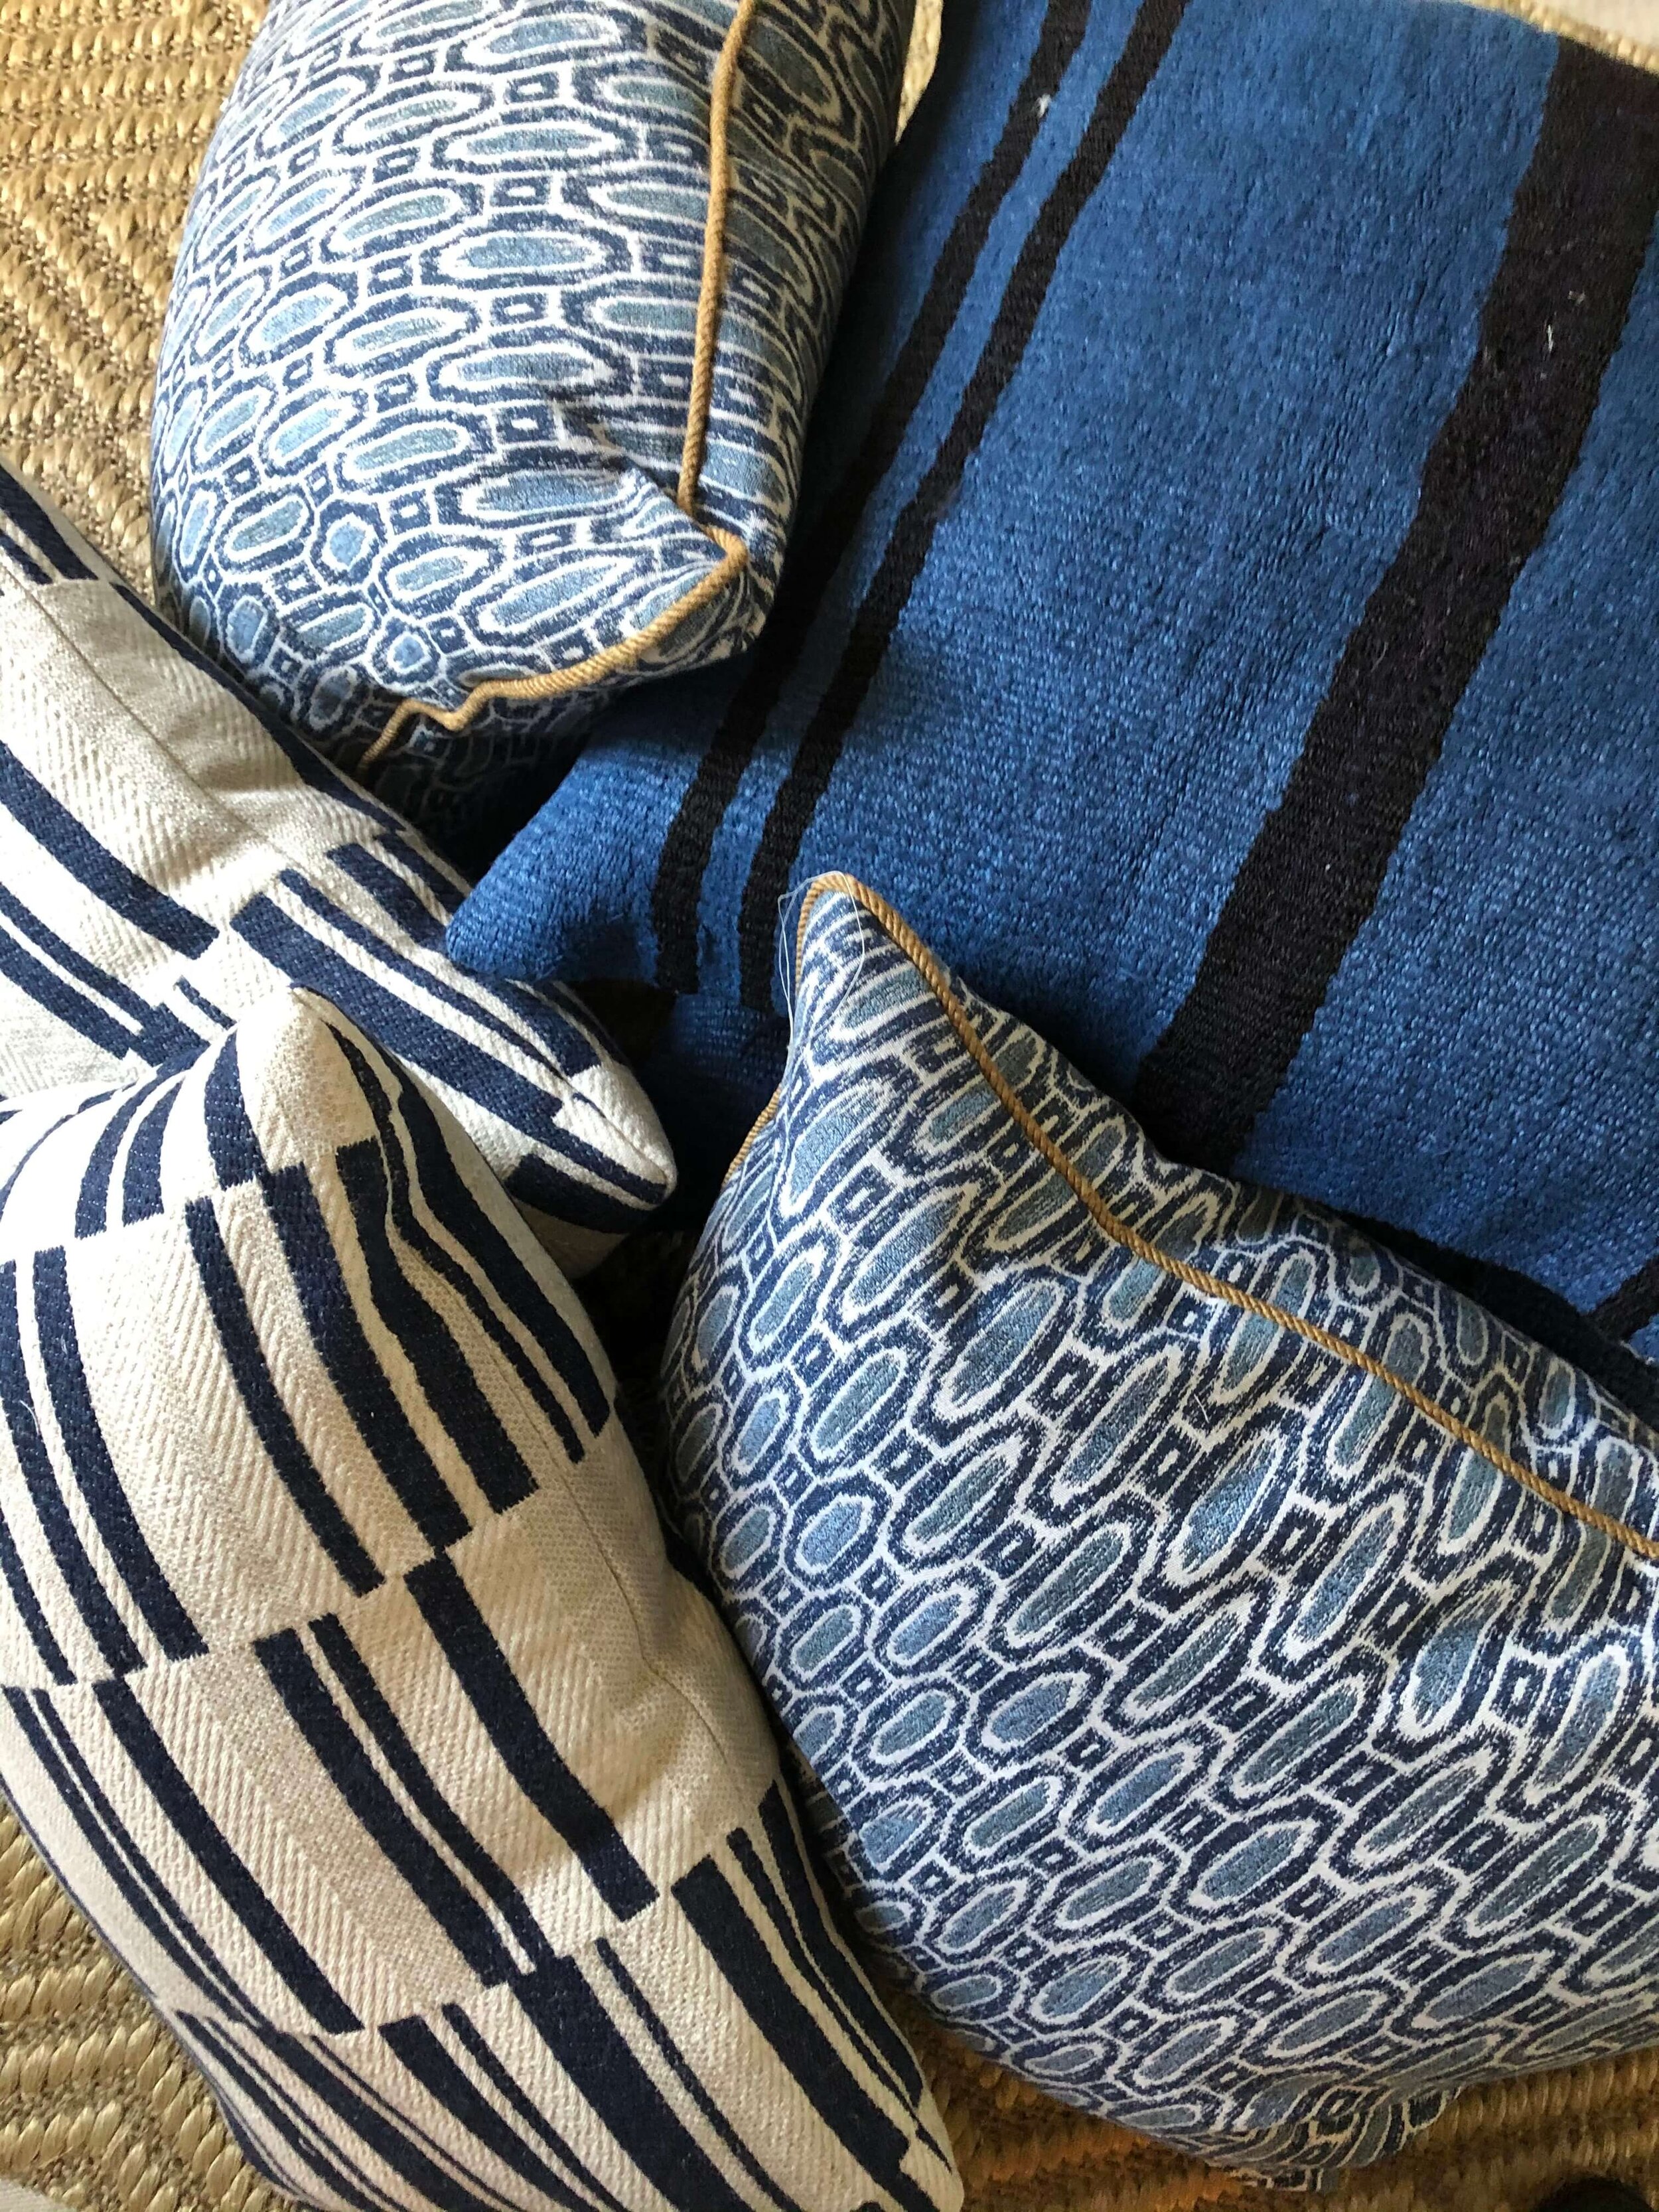 How To Pick Perfect Decorative Throw Pillows For Your Sofa, Bed Or Chair —  DESIGNED